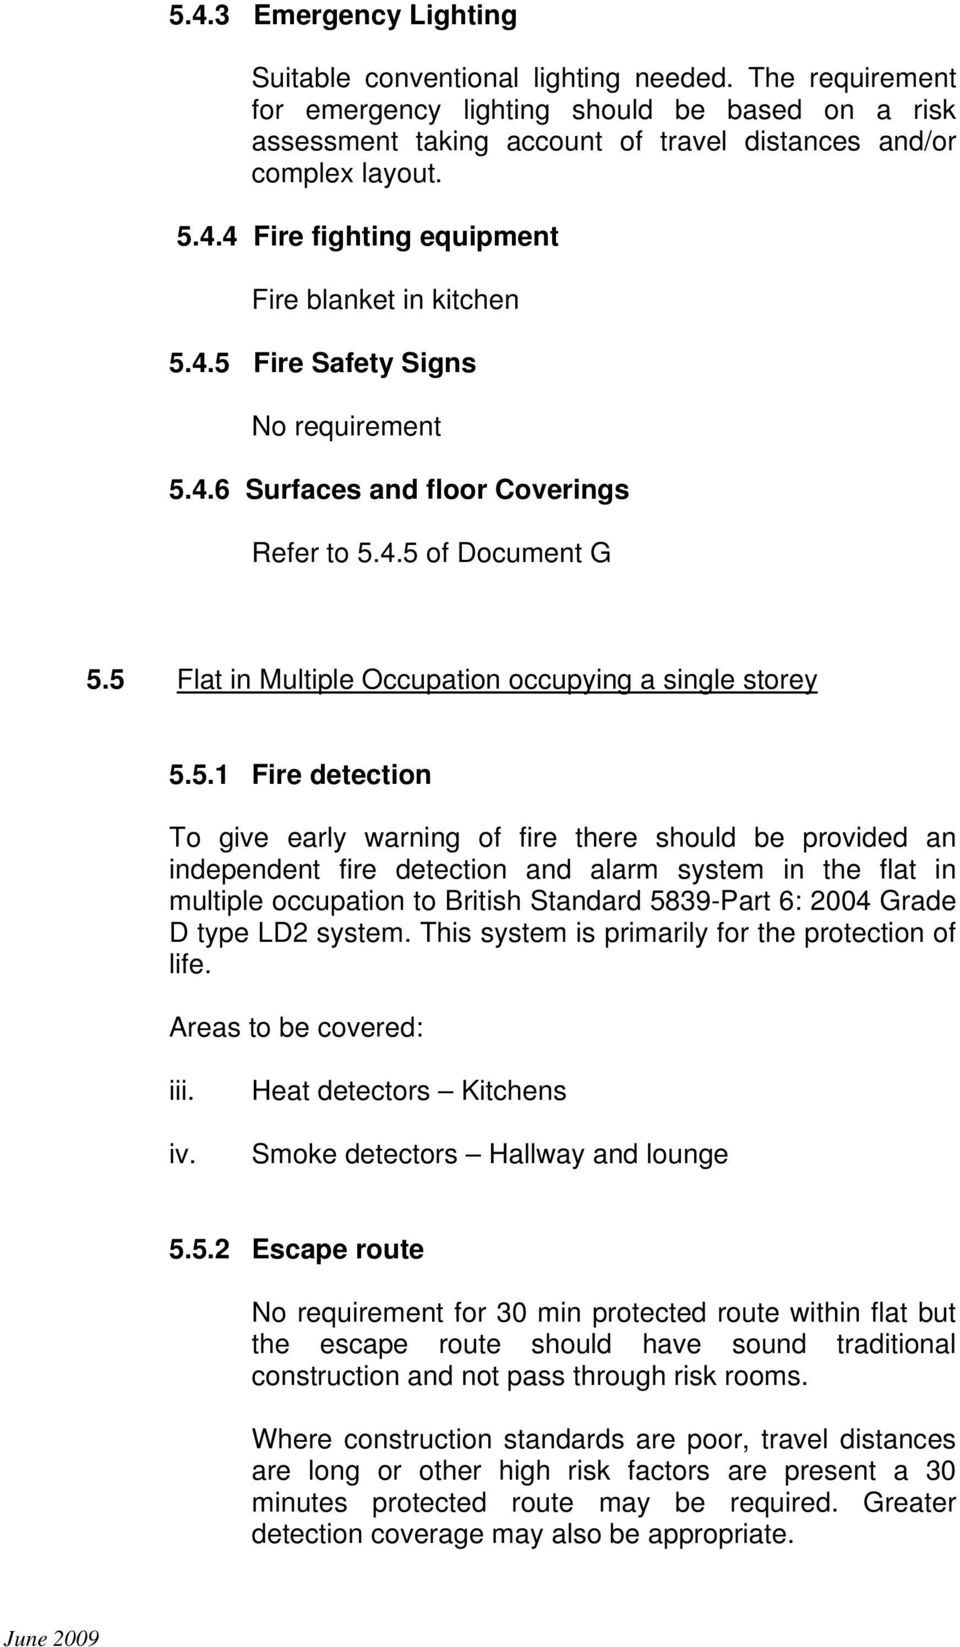 4.5 Fire Safety Signs No requirement 5.4.6 Surfaces and floor Coverings 5.5 Flat in Multiple Occupation occupying a single storey 5.5.1 Fire detection To give early warning of fire there should be